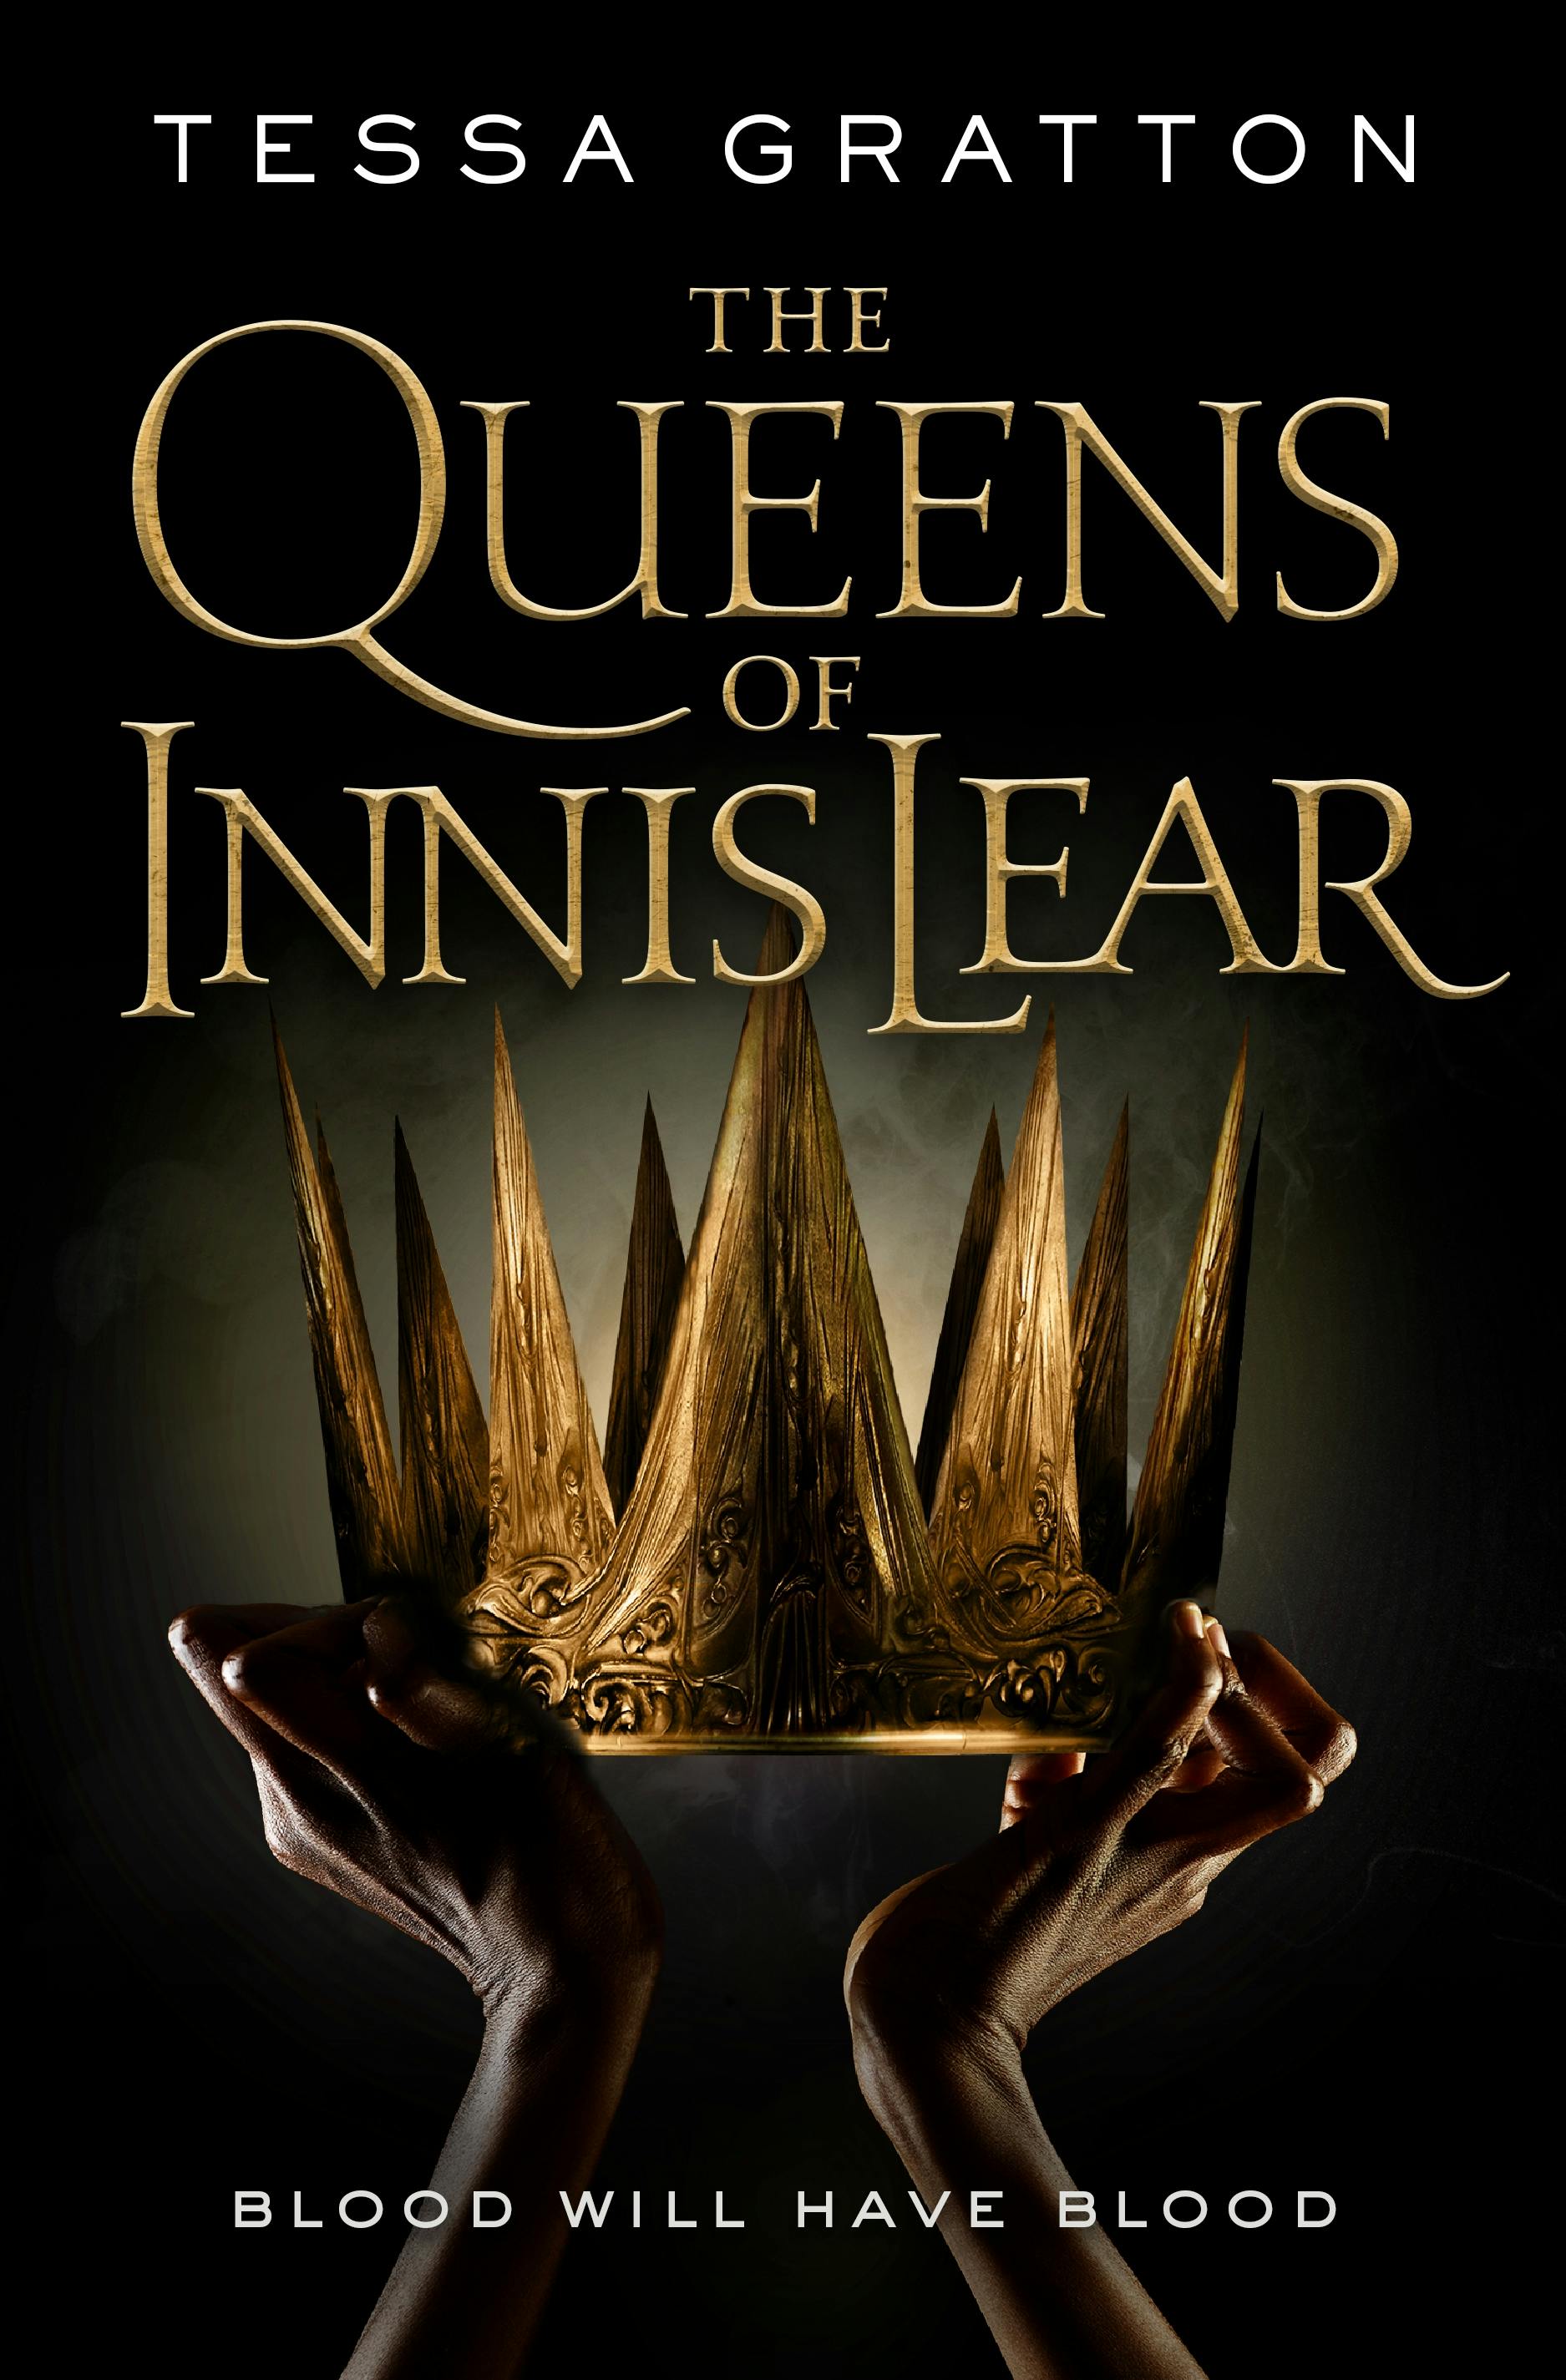 Cover for the book titled as: The Queens of Innis Lear